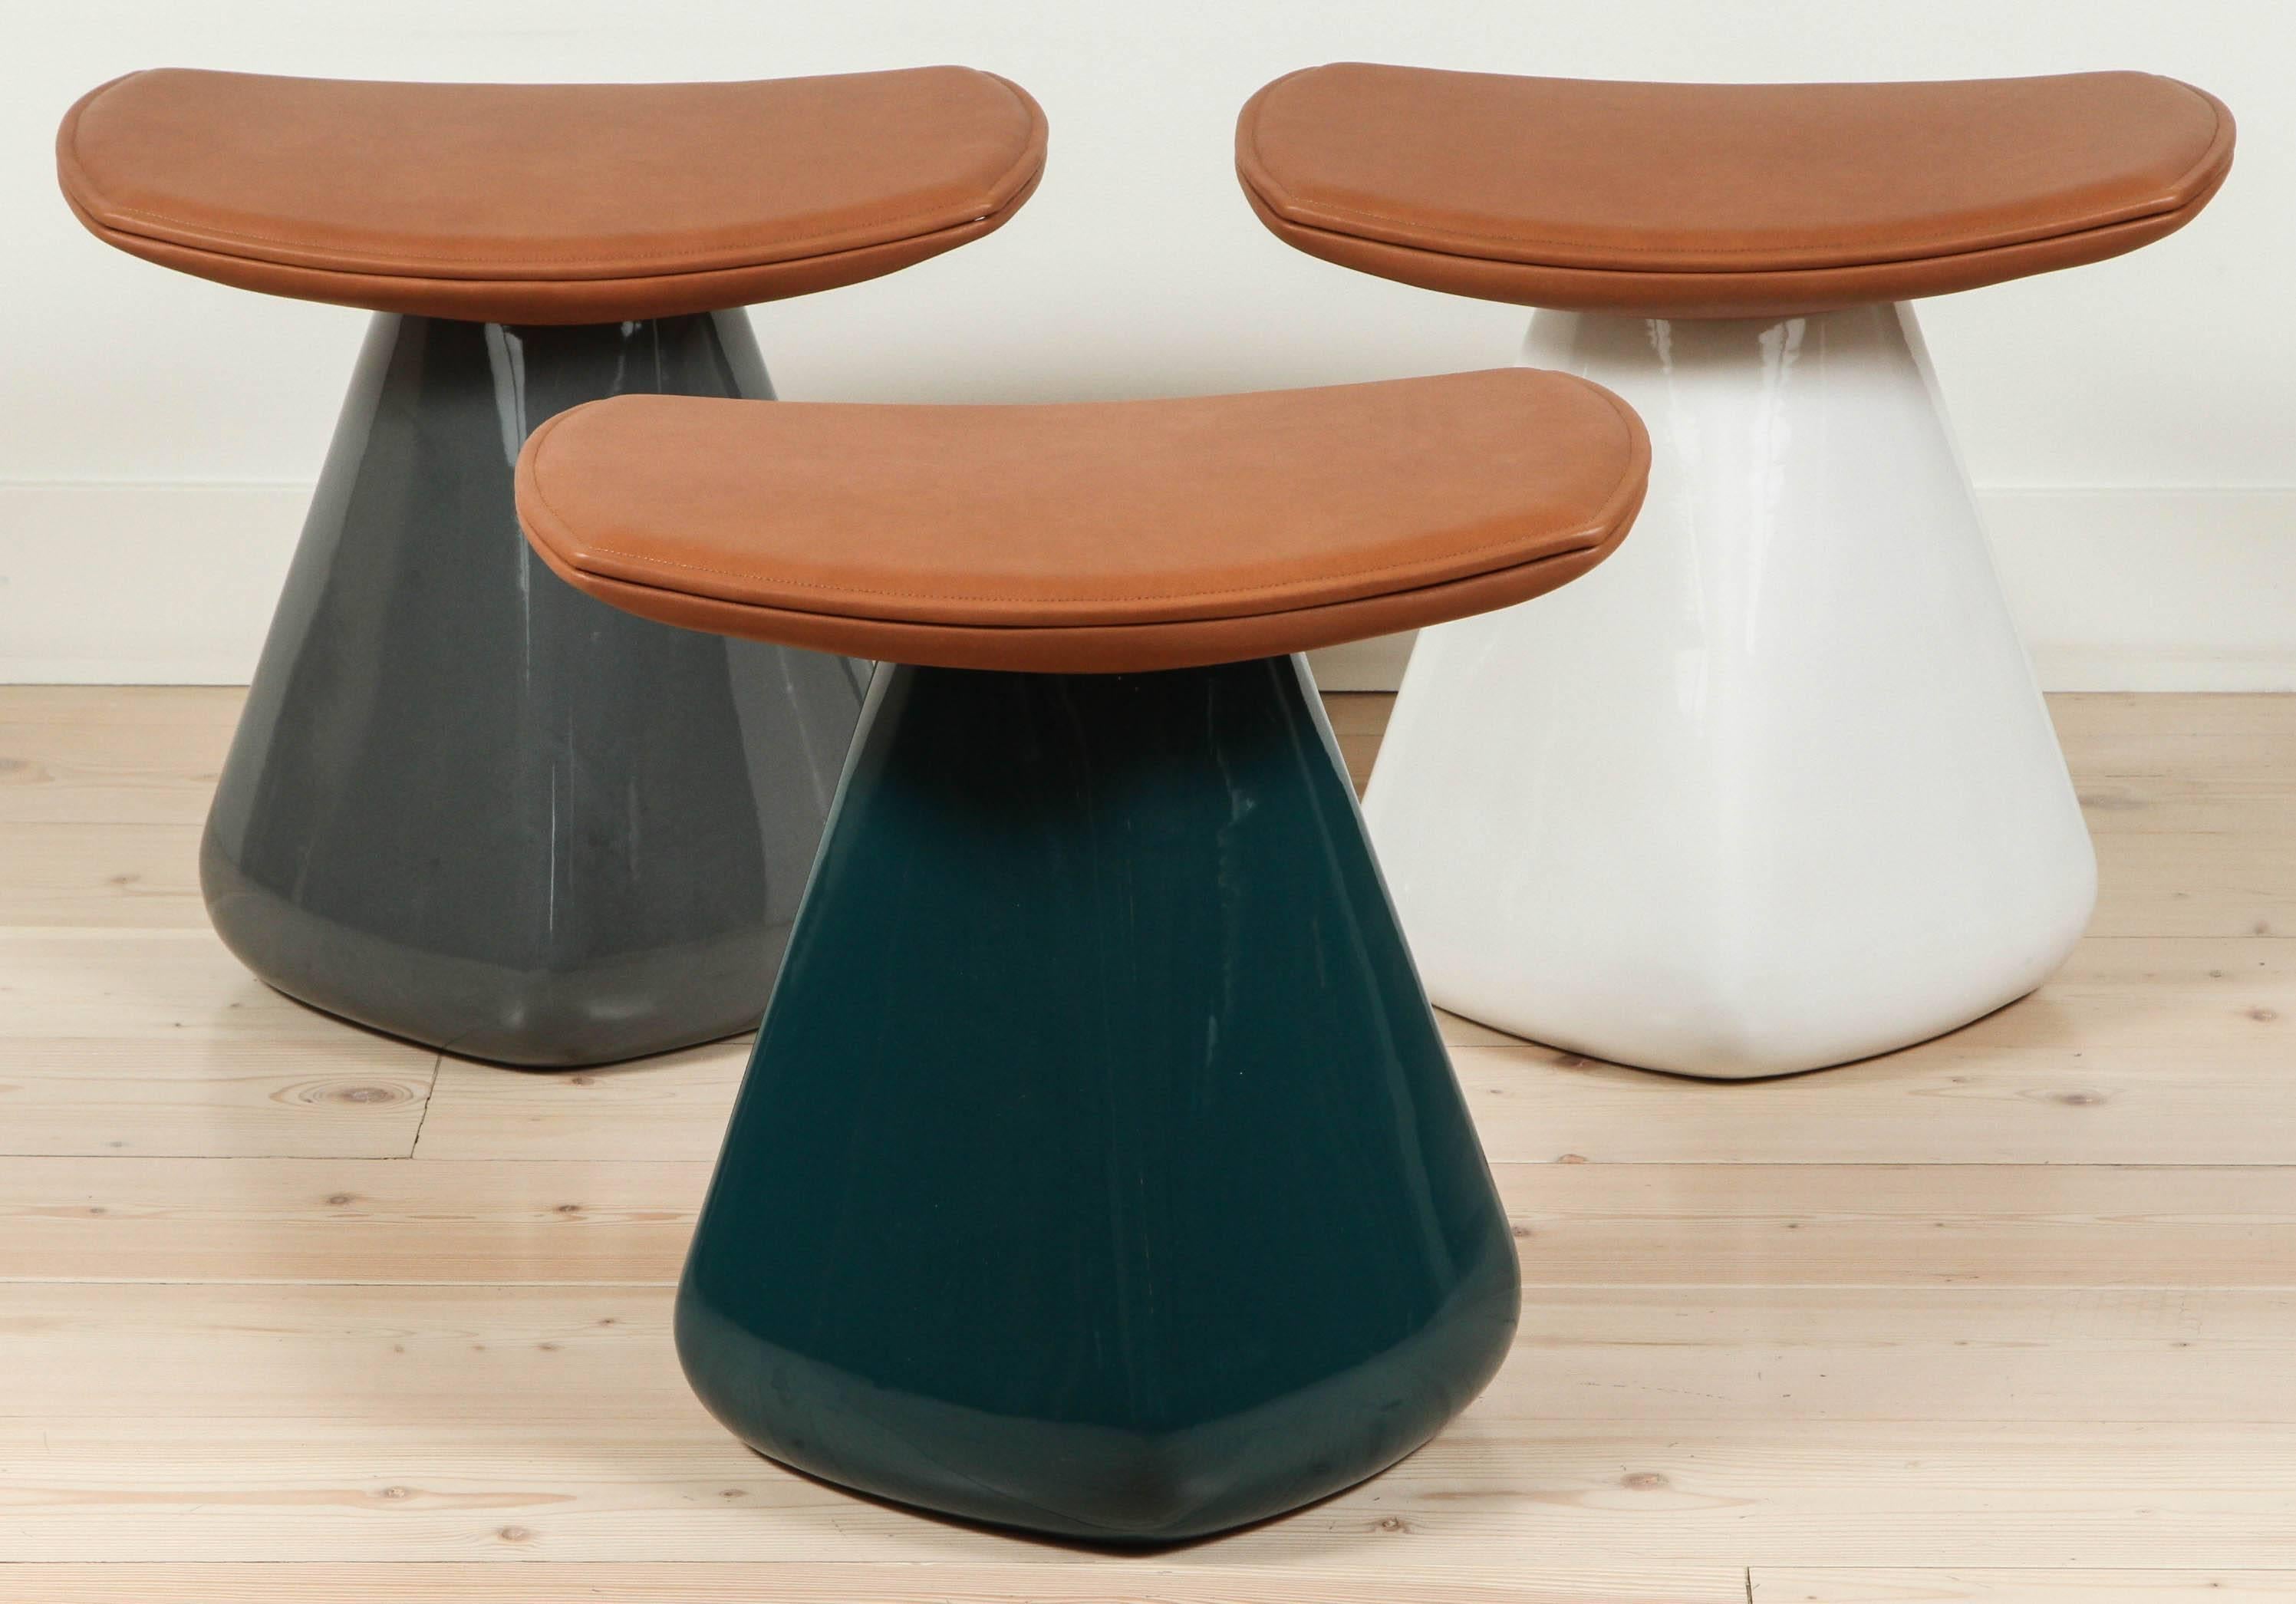 Dam stool by Collection Particulière.